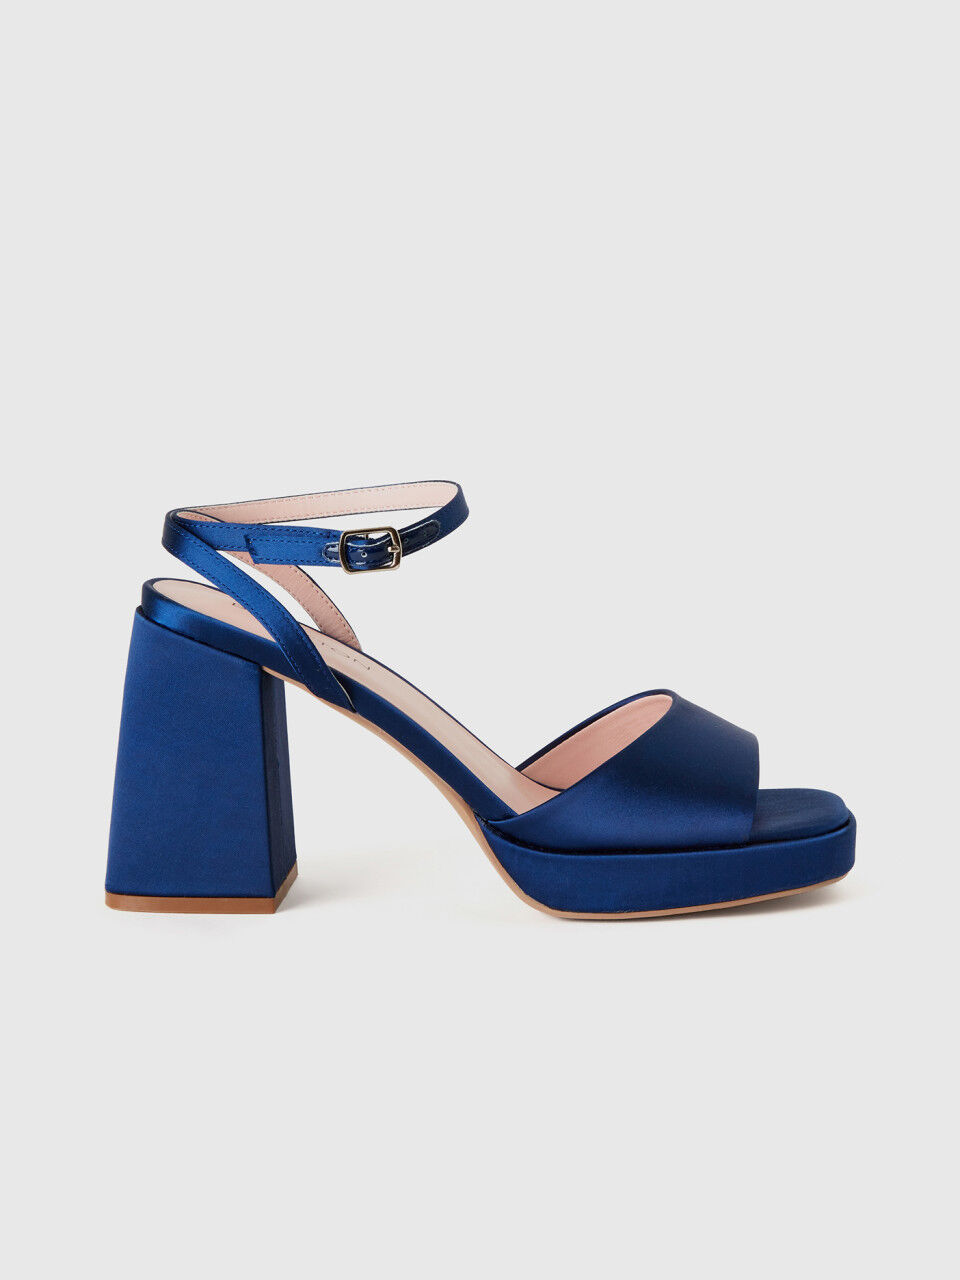 These Comfy Block Heel Sandals Are on Sale for $32 at Amazon